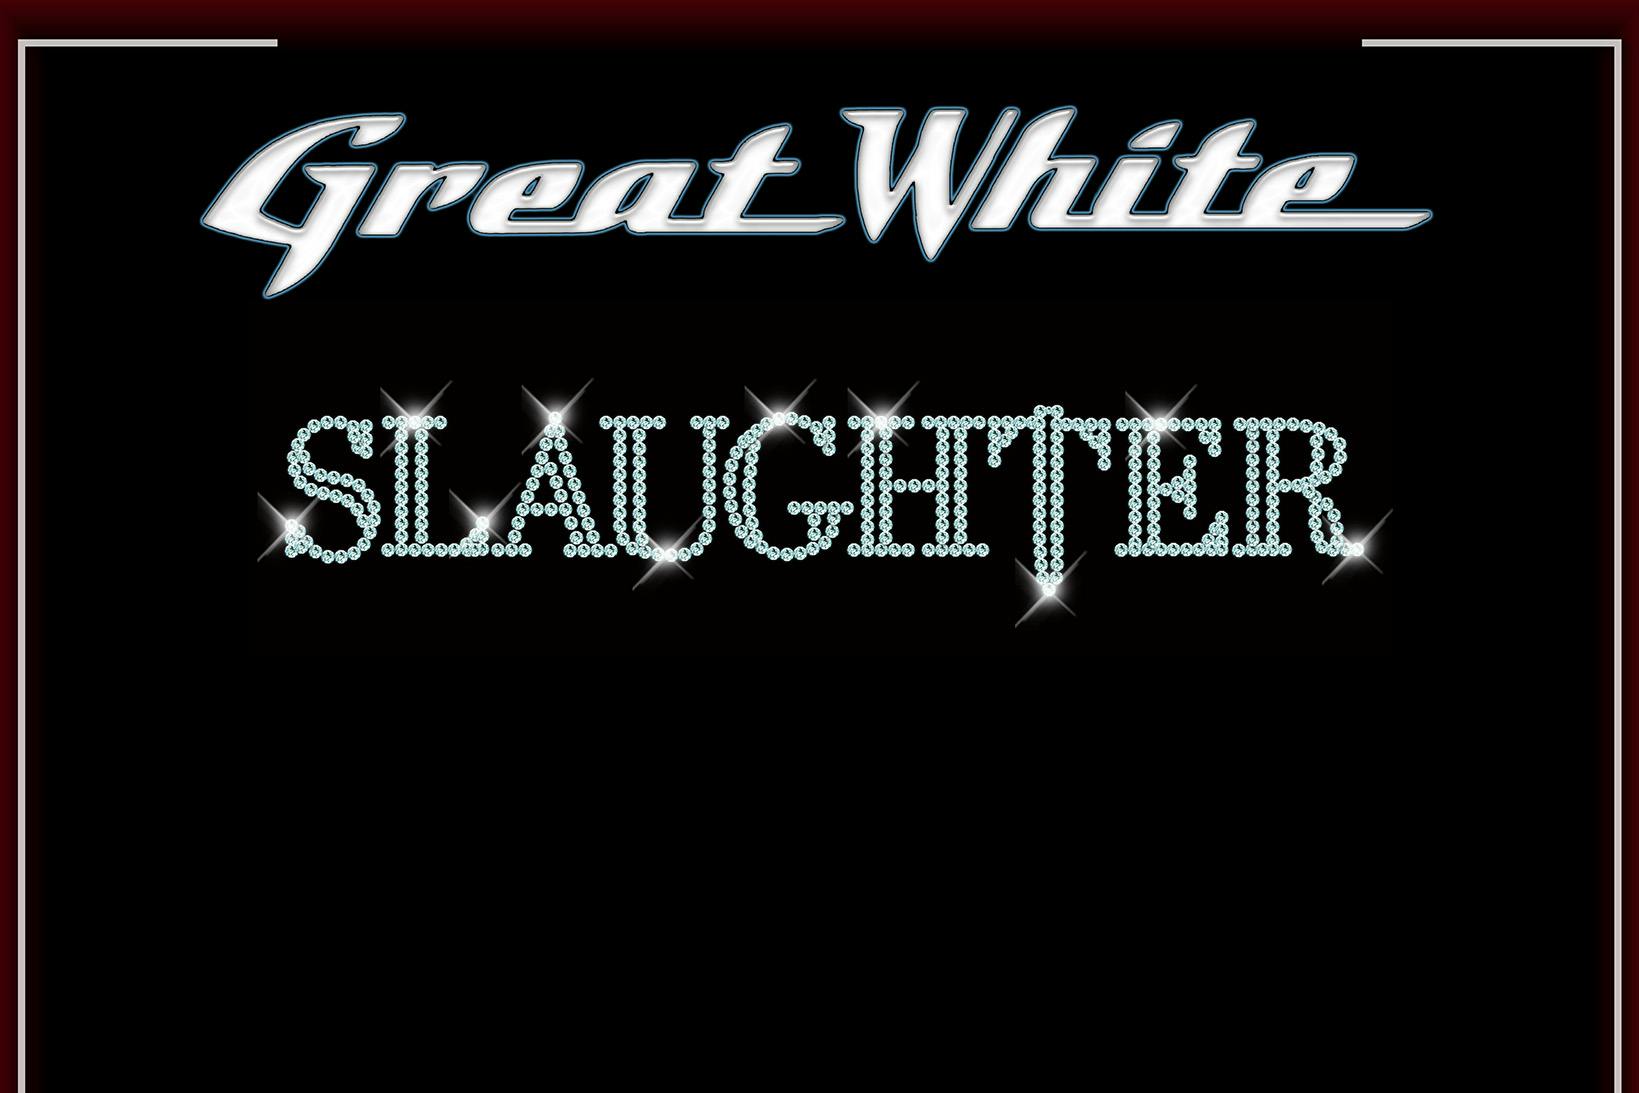 https://images.prismic.io/schenectady-rushstreetgaming/5116a3b6-0eb5-4a45-a7c8-df05aa9854a3_Great+White+and+Slaughter_Web+Gallery.jpg?auto=compress,format